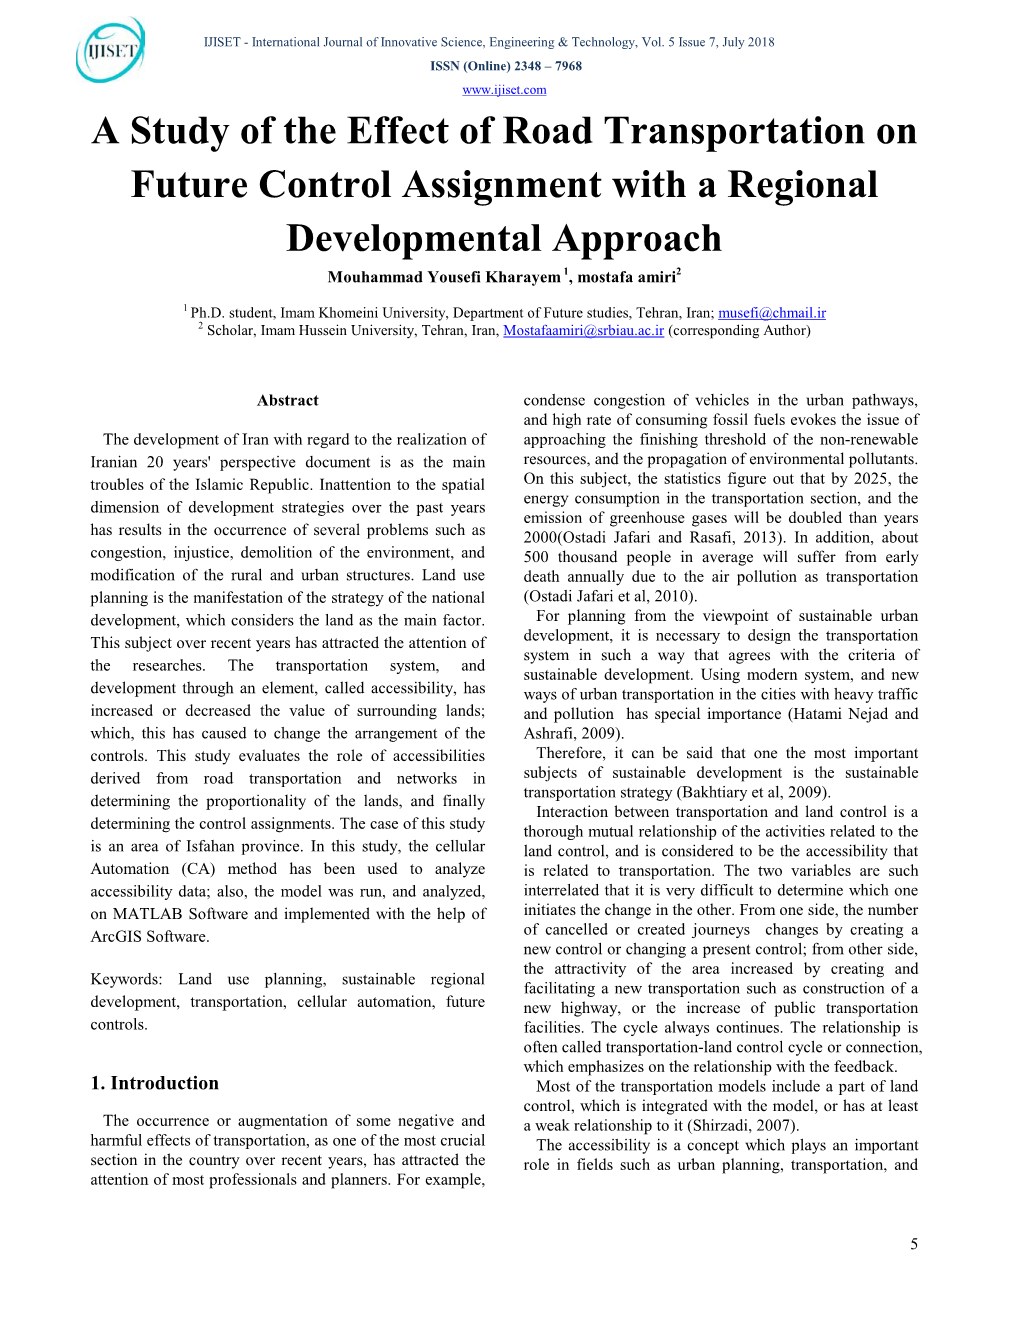 A Study of the Effect of Road Transportation on Future Control Assignment with a Regional Developmental Approach Mouhammad Yousefi Kharayem 1, Mostafa Amiri2